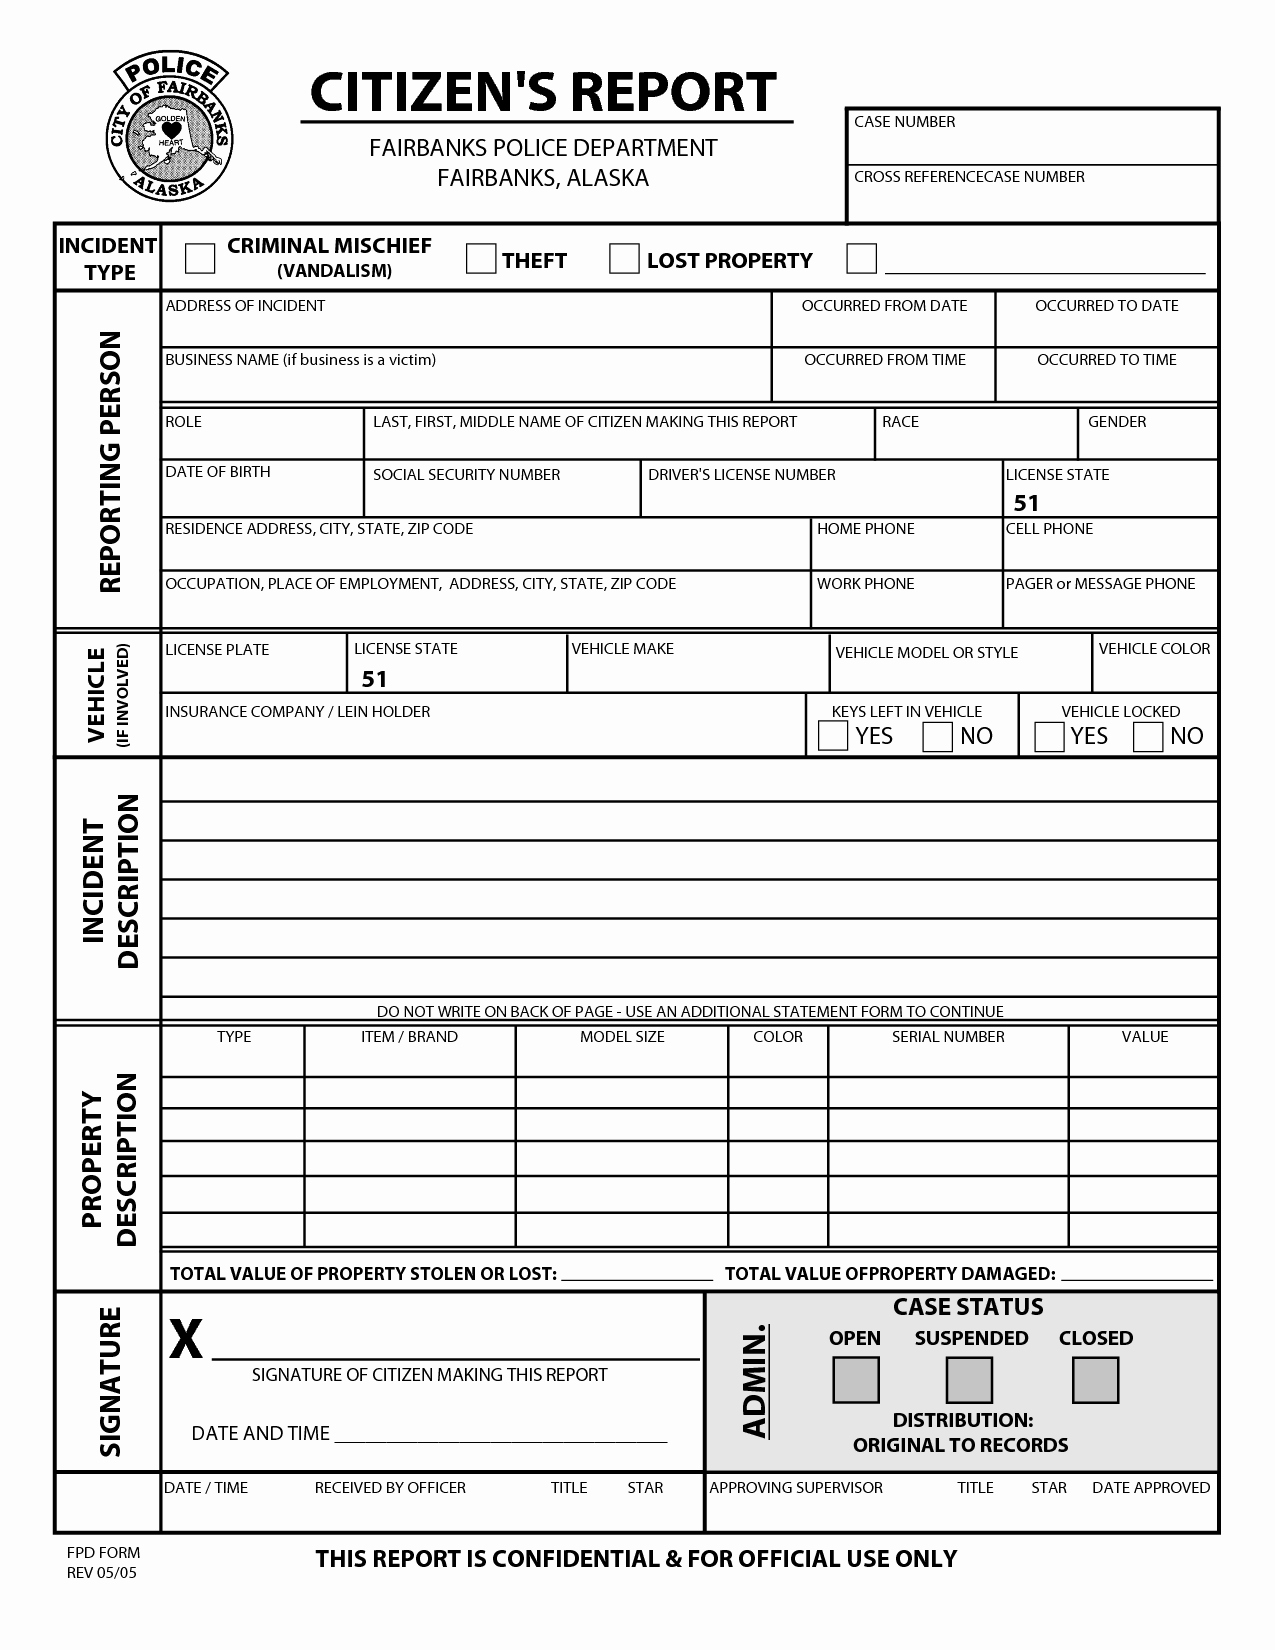 Sample Police Report Template Lovely Best S Of Police Report Pdf Sample Police Report